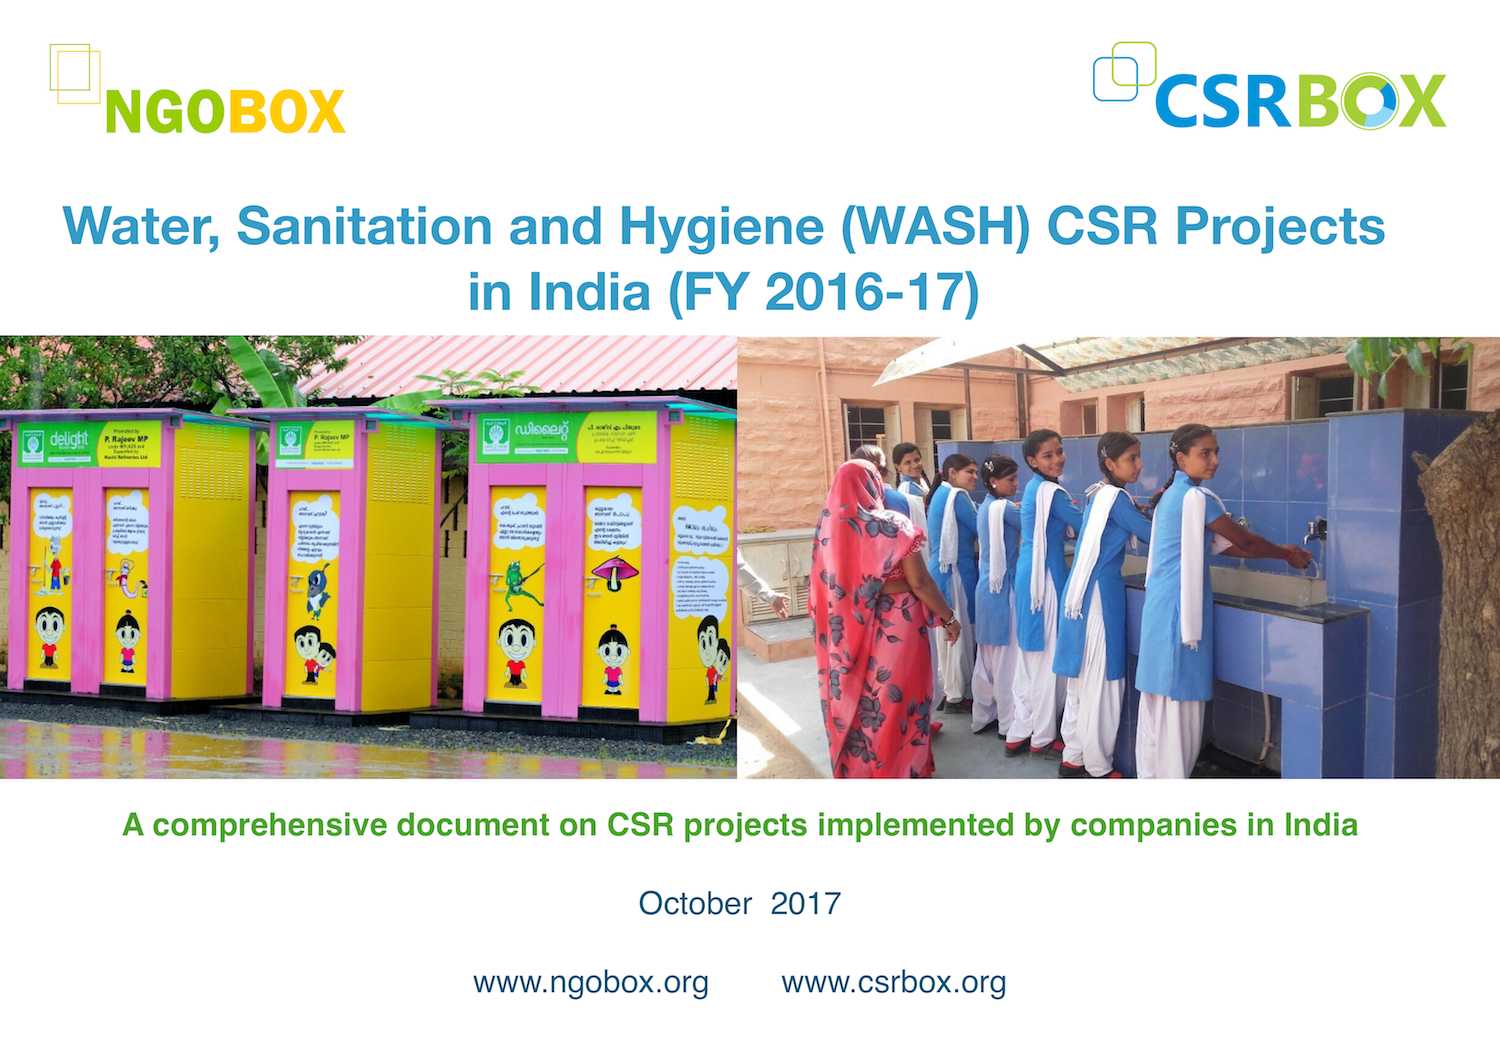 Water and Sanitation CSR Projects in India (FY 2016-17)